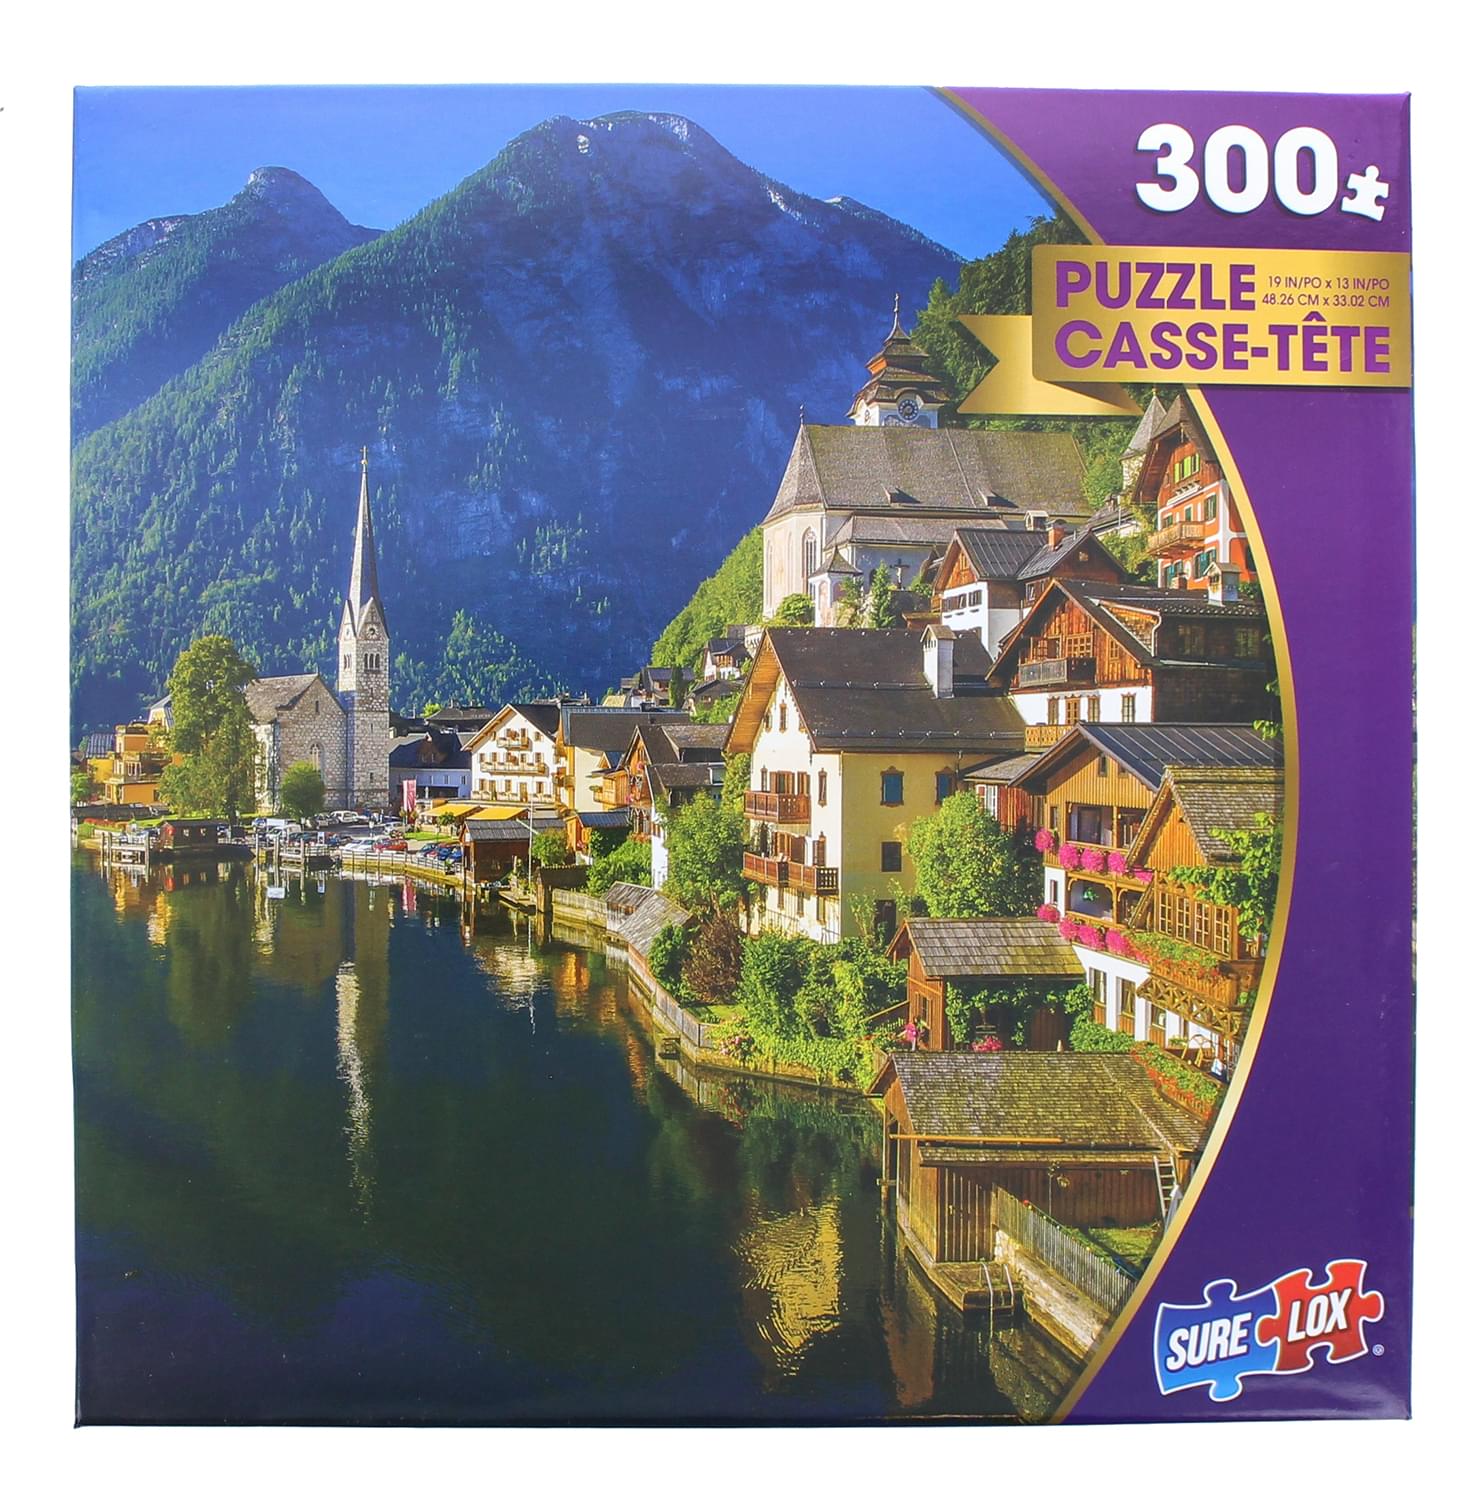 Hallstate Lakeside Town 300 Piece Jigsaw Puzzle